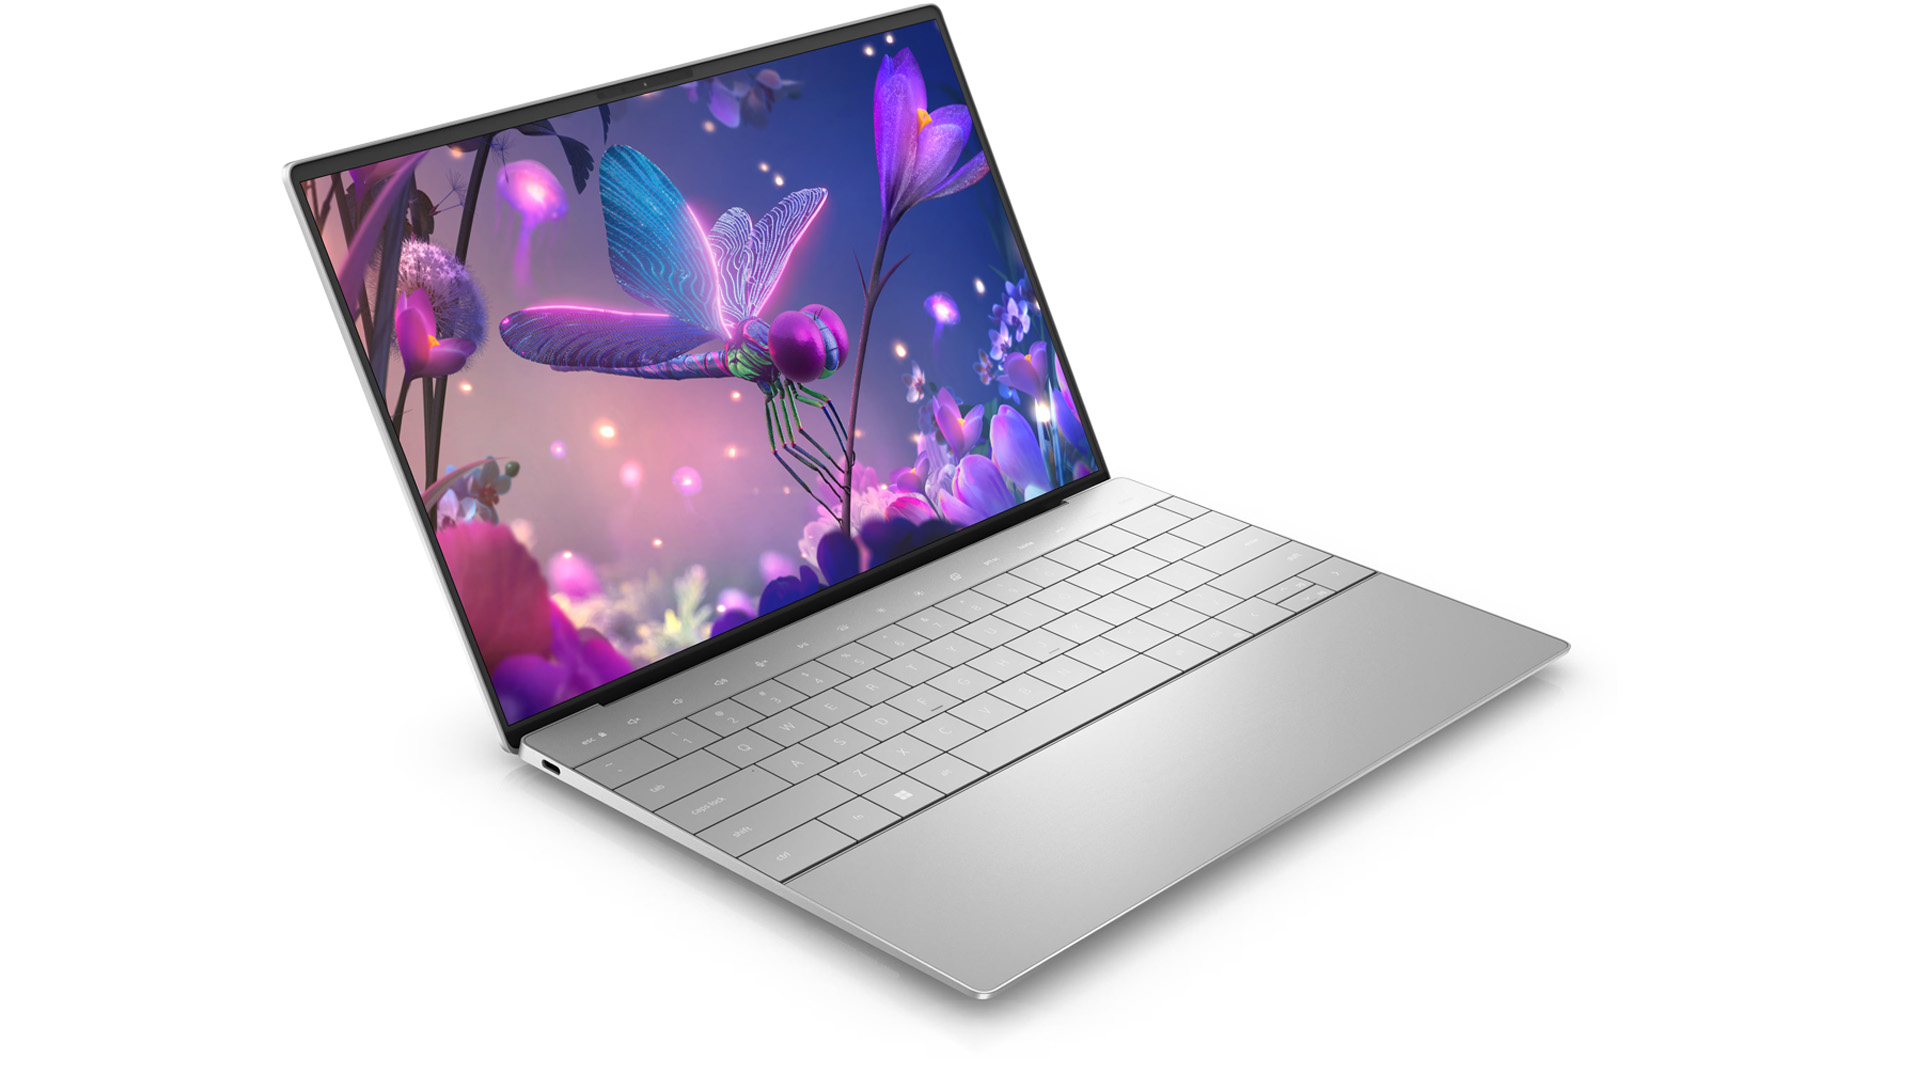 Dell XPS 13 Plus: Design, Features, Performance, And More!